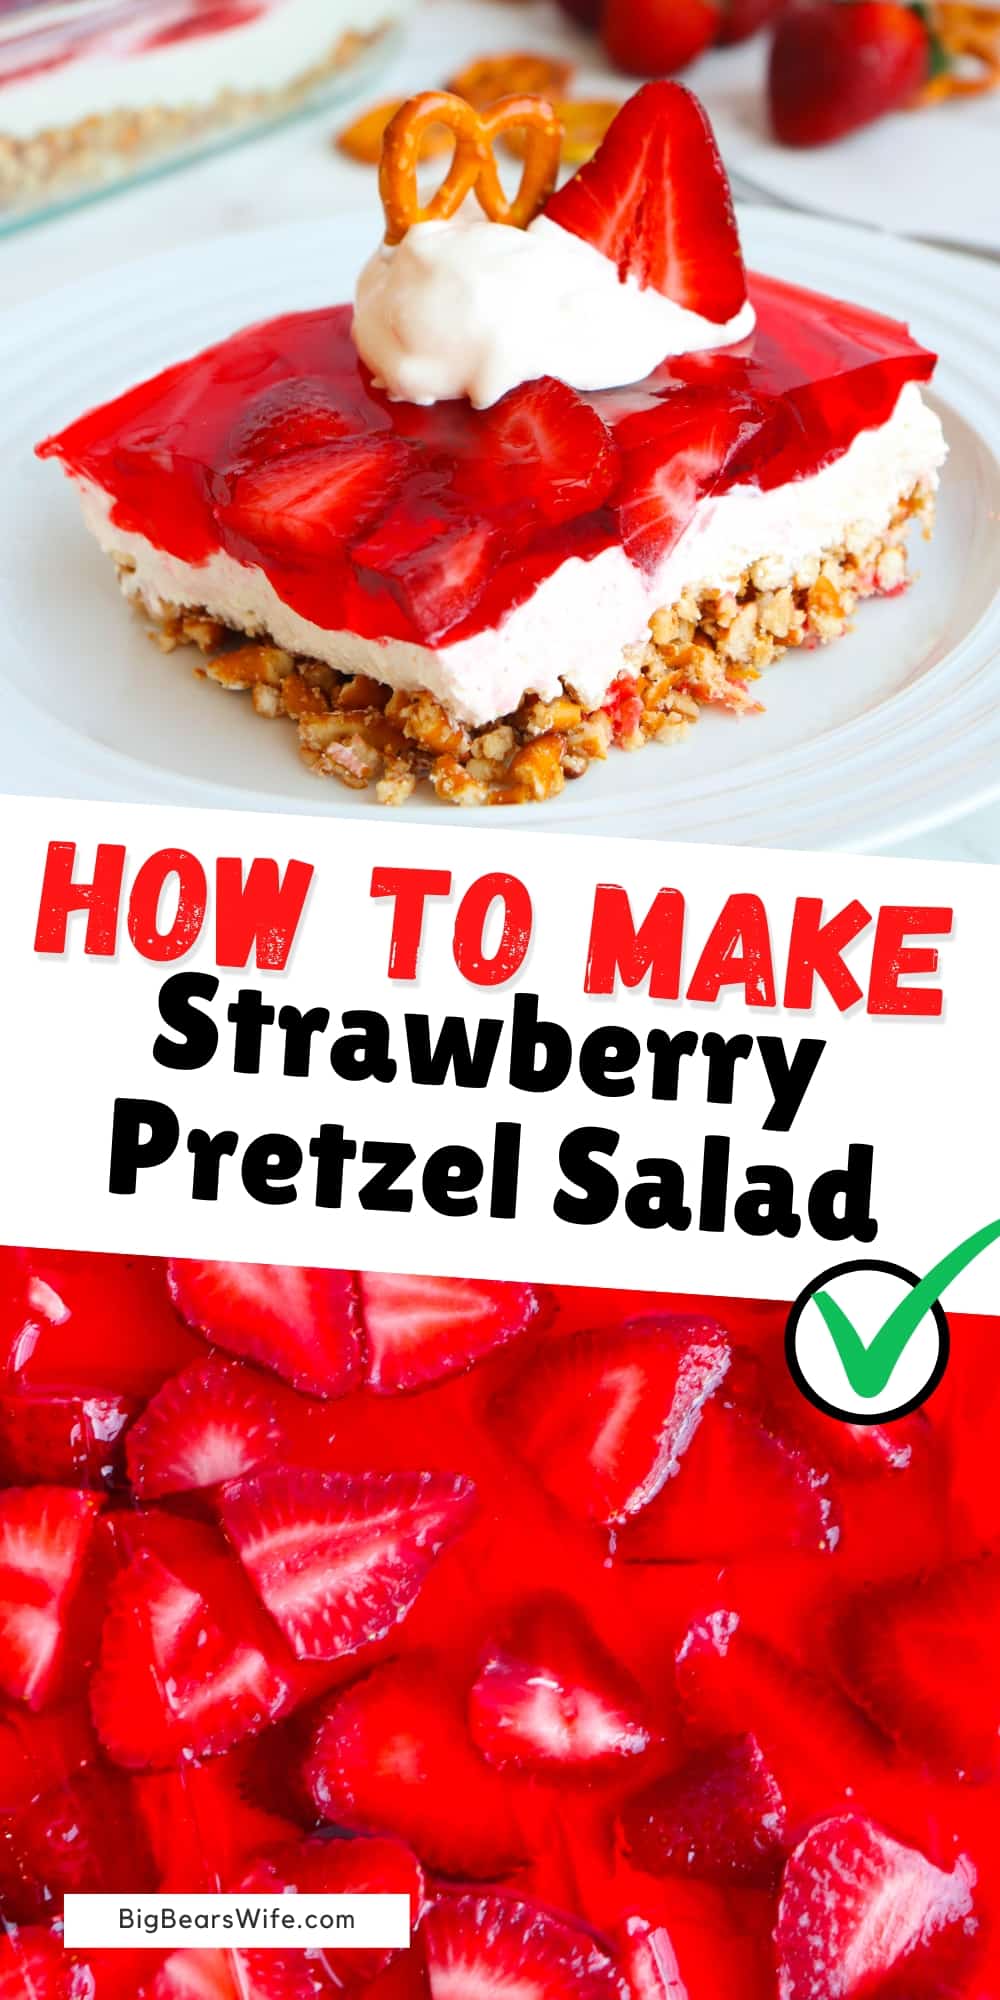 Looking for a refreshing and sweet side dish for your summer barbecue? Look no further than strawberry pretzel salad. This easy to make dish is perfect for any outdoor gathering and is sure to be a crowd pleaser. via @bigbearswife